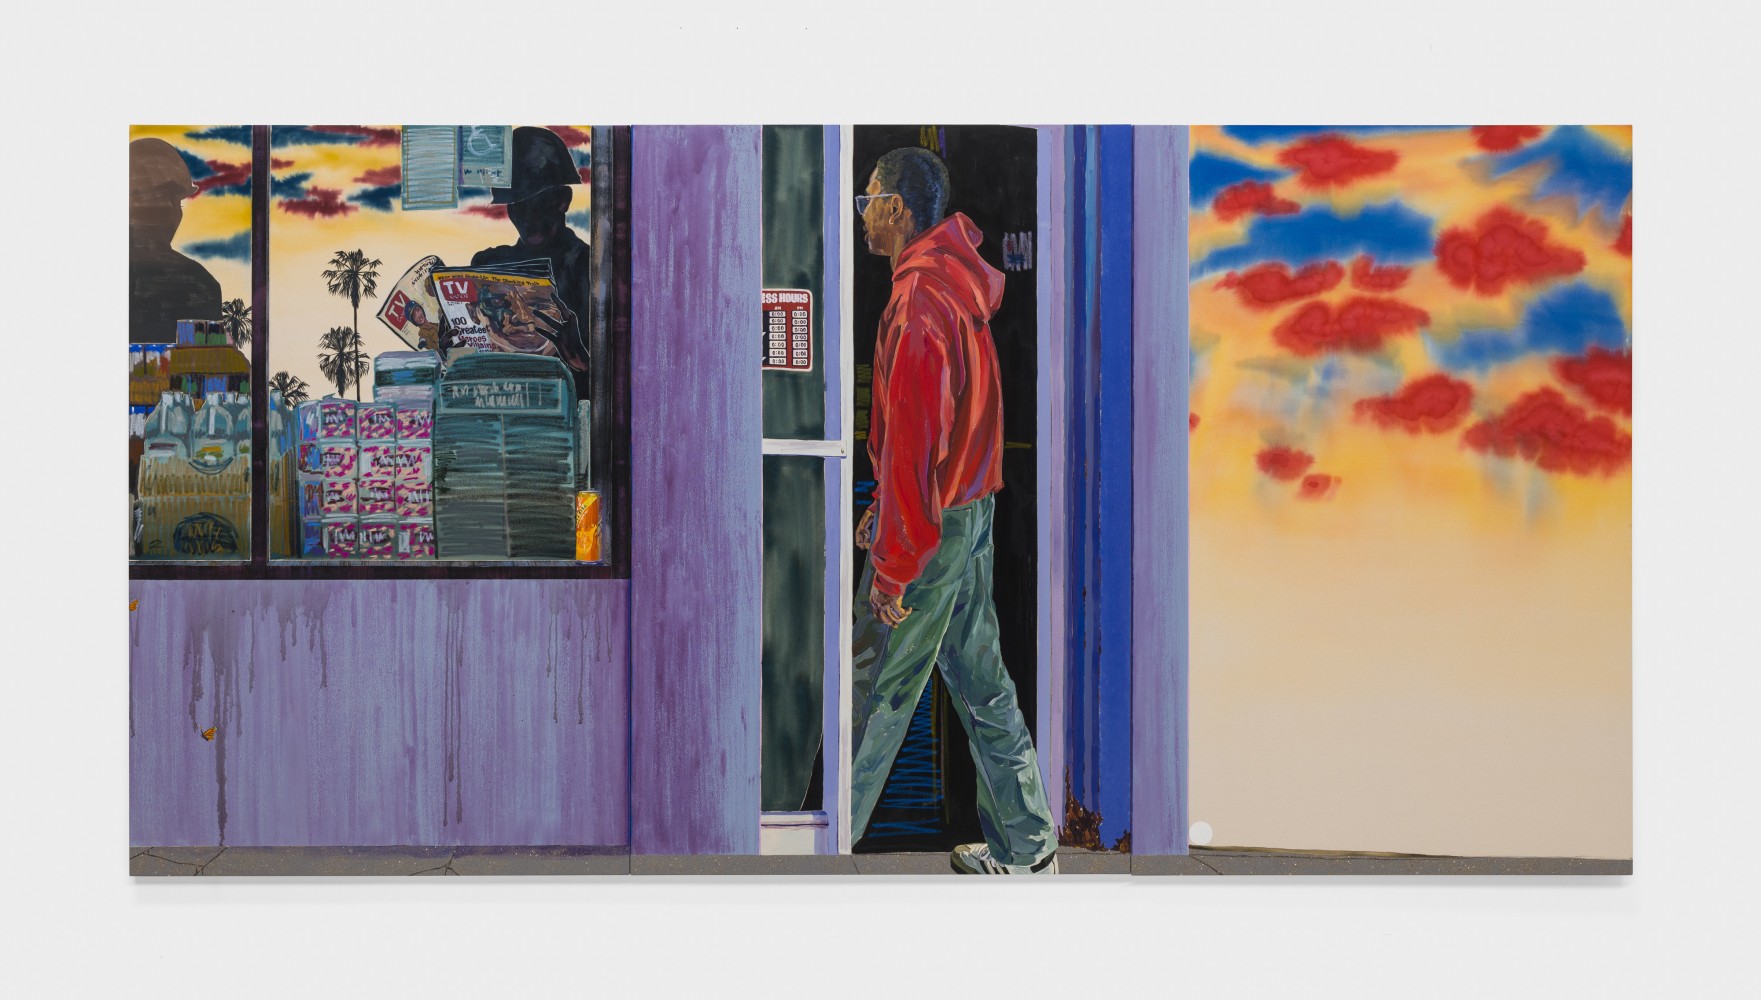 A three panel painting by Tidawhitney Lek depicting a man in  red sweatshirt walking into a liquor store wherein the silhouettes of men in military attire read the TV guide.